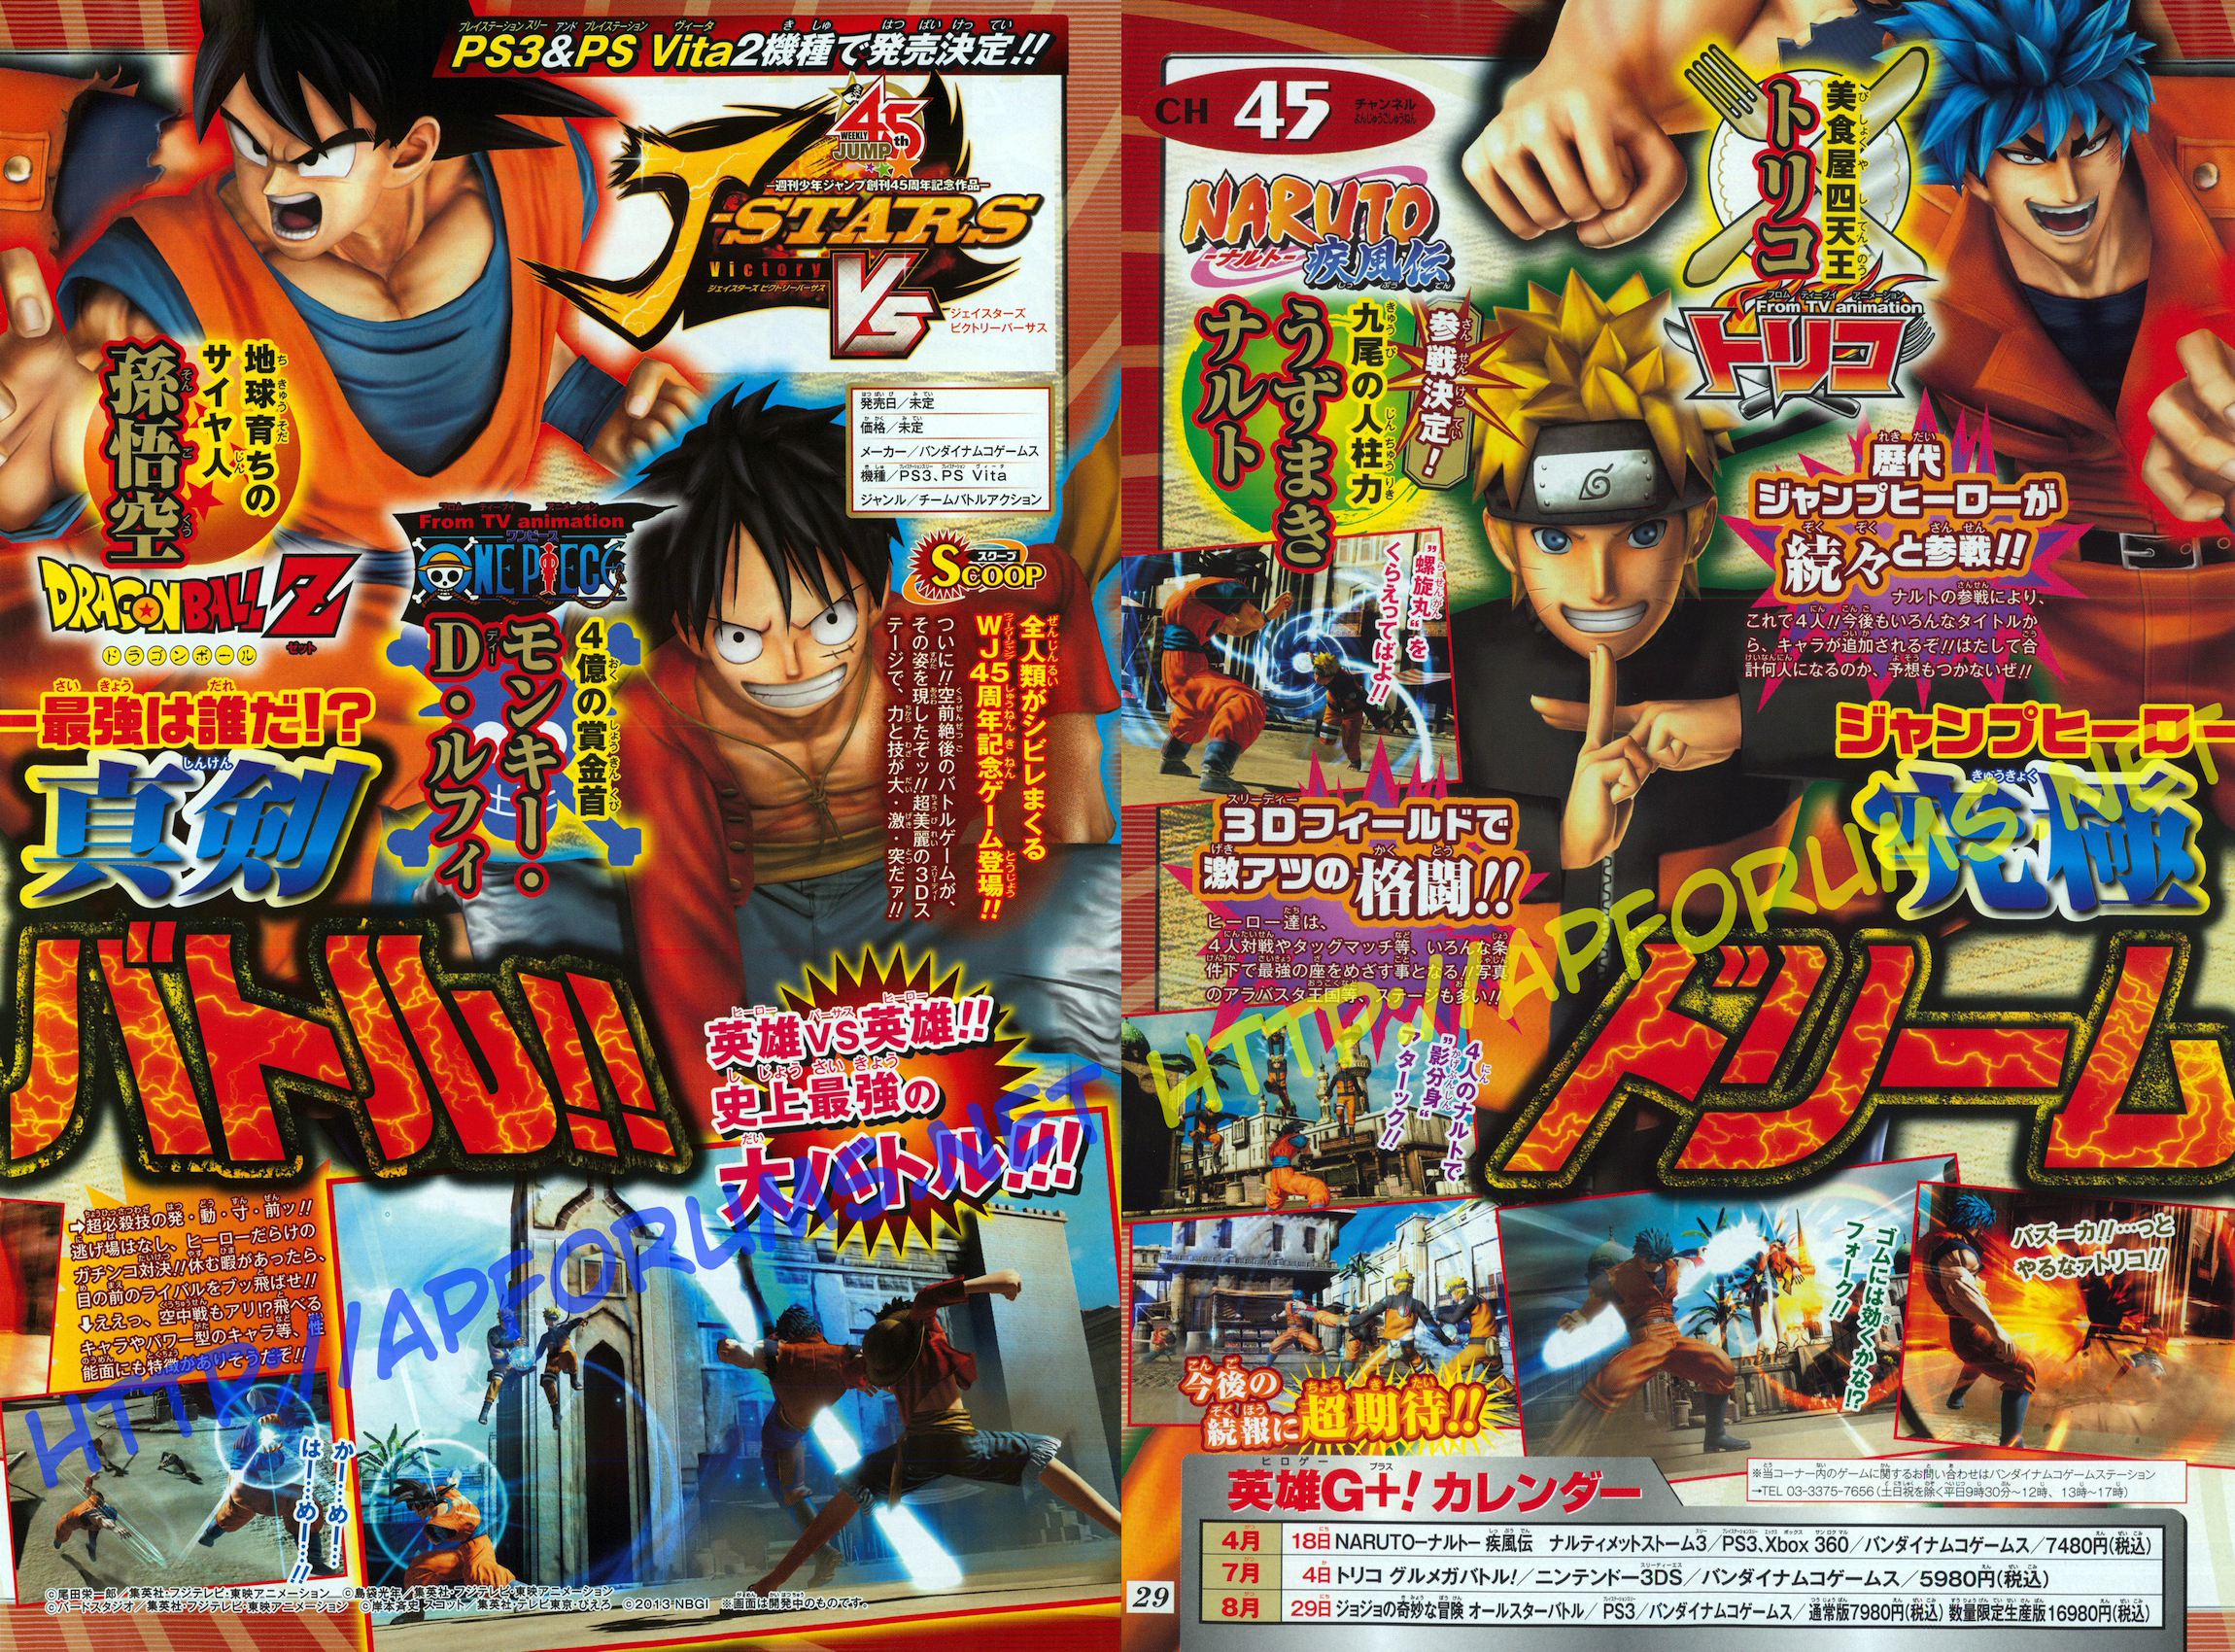 Project Versus J Is Now J Stars Victory Vs And Naruto Is Playable Just Push Start